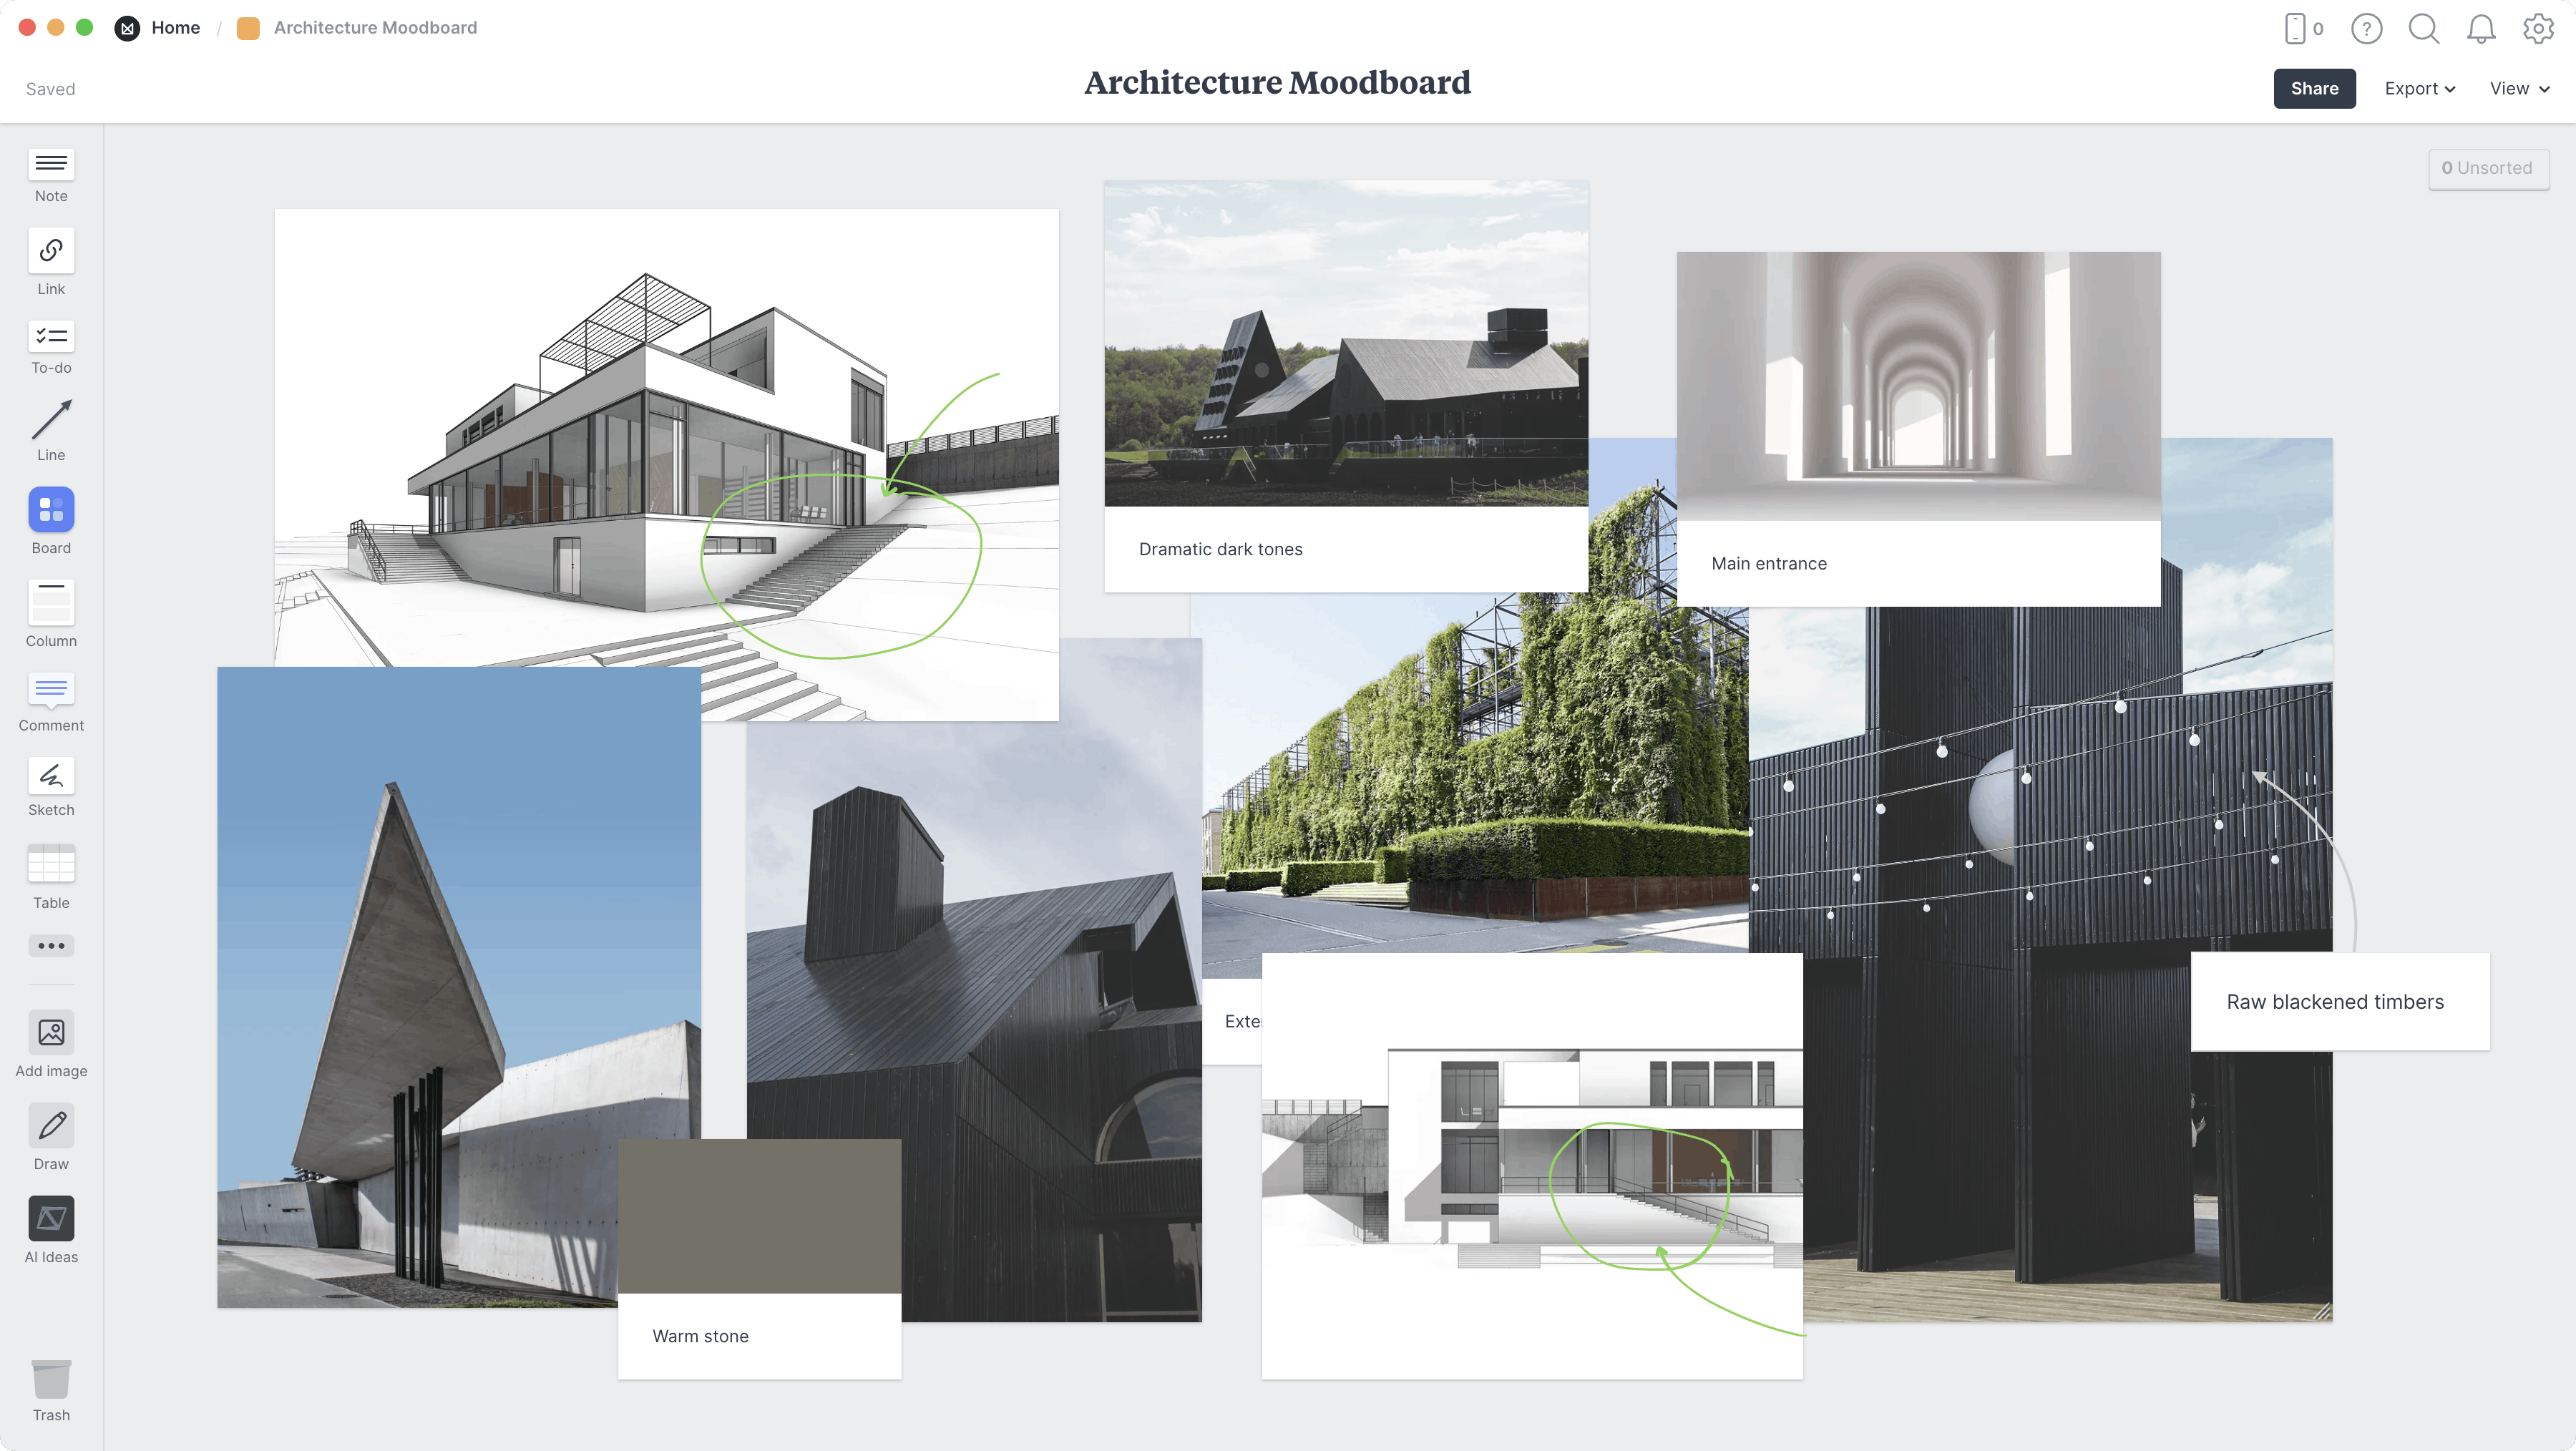 Architecture Moodboard Template, within the Milanote app